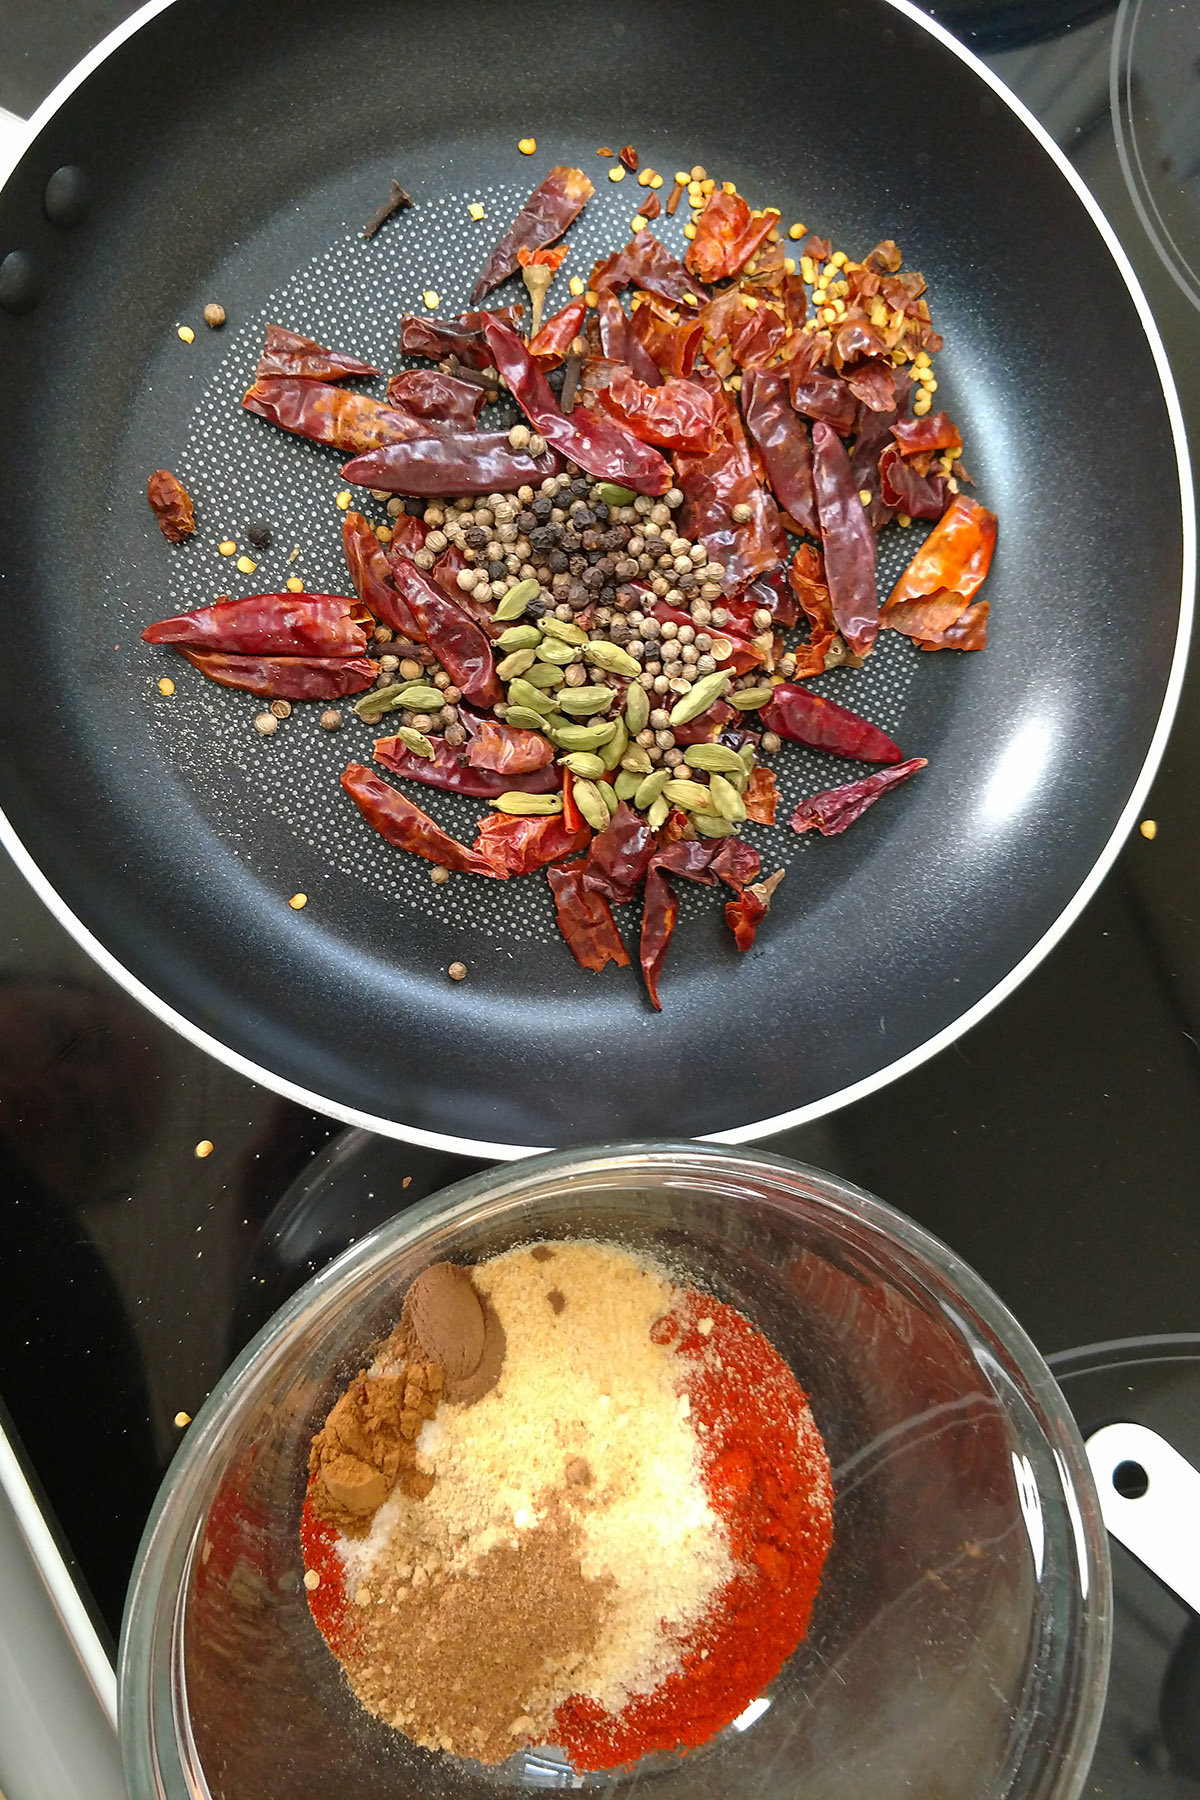 Dried chilies and other spices in a frying pan.